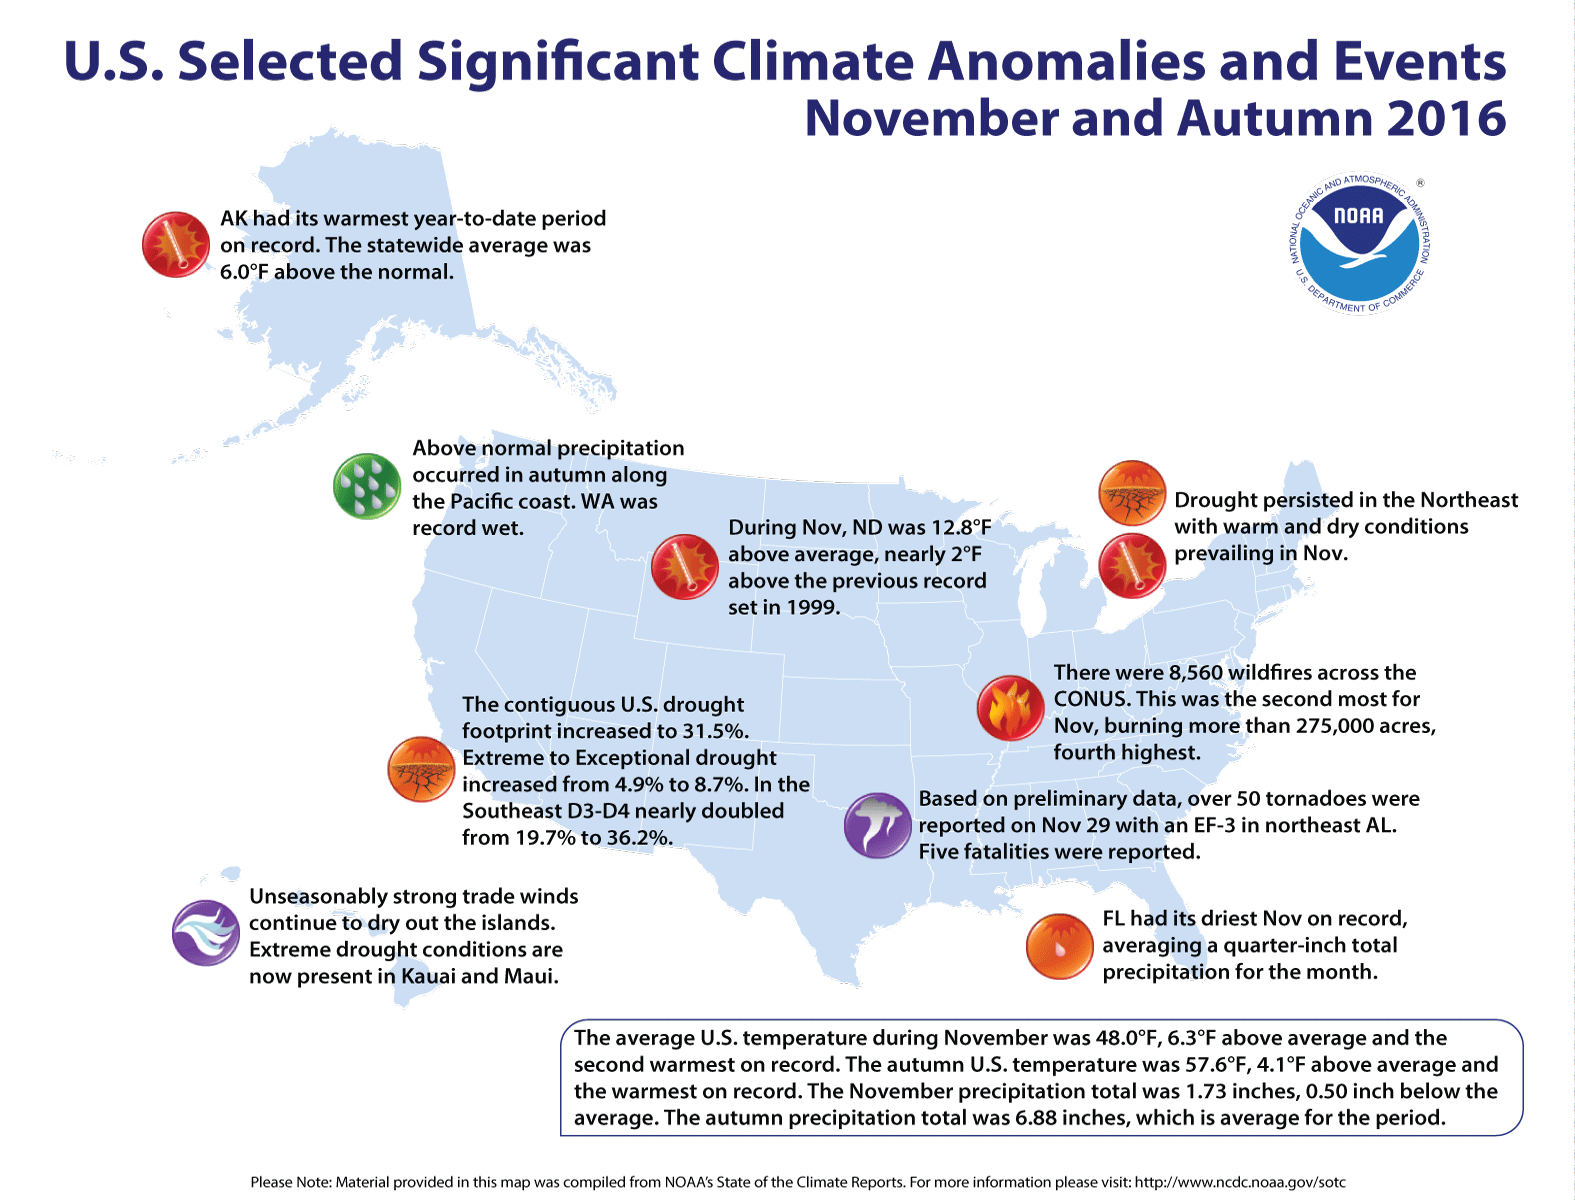 Here's a map of significant climate events that occurred in the U.S. in November and during Autumn 2016.